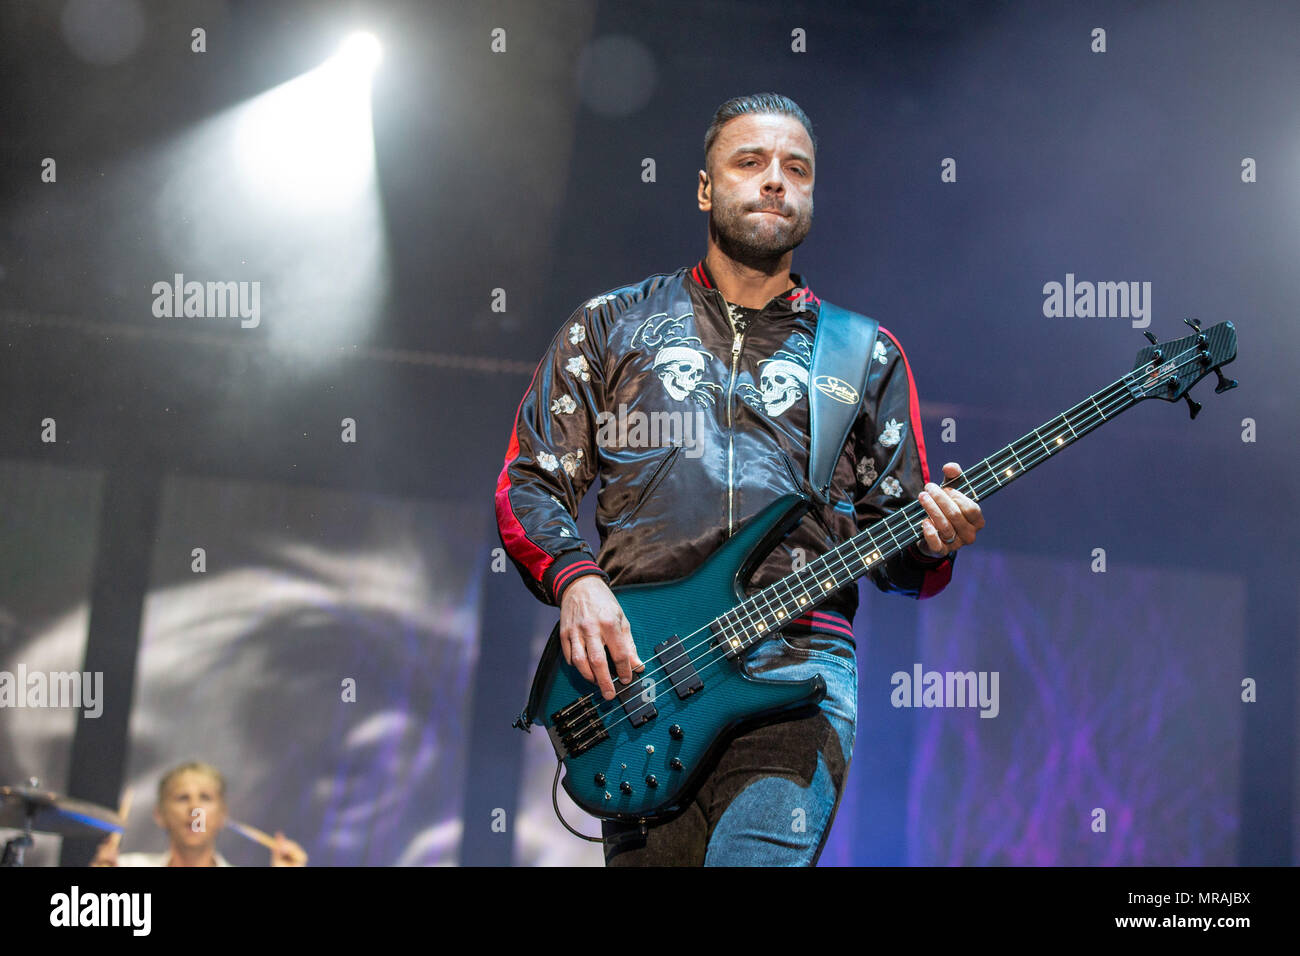 Napa California Usa 25th May 18 Chris Wolstenholme Of Muse During Bottlerock Music Festival At Napa Valley Expo In Napa California Credit Daniel Deslover Zuma Wire Alamy Live News Stock Photo Alamy